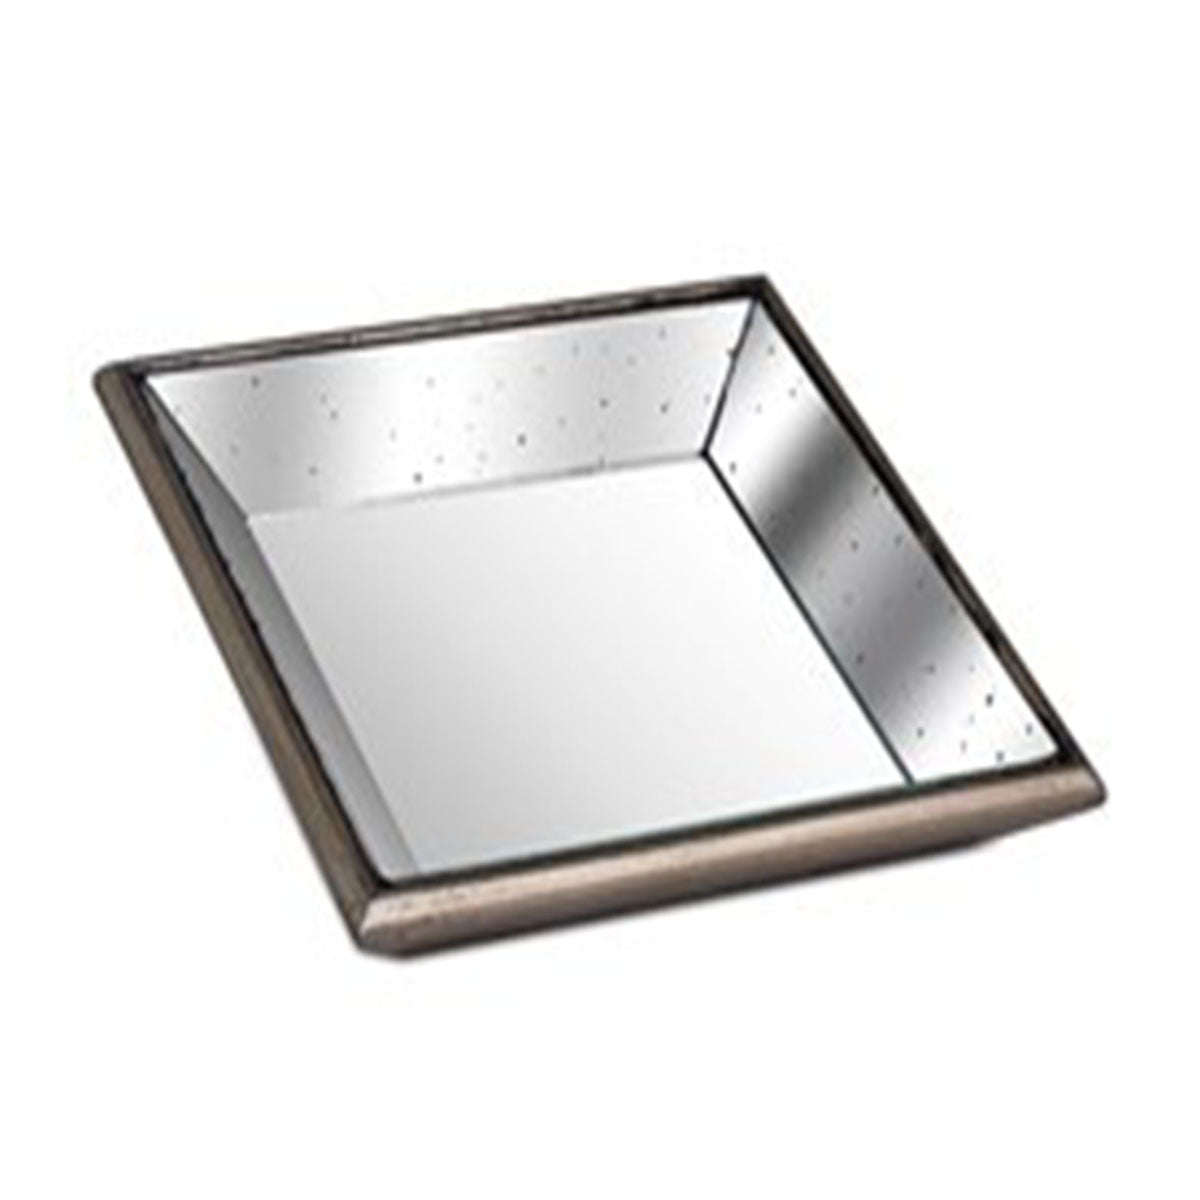 Astor Distressed Mirrored Square Tray W/Wooden Detailing